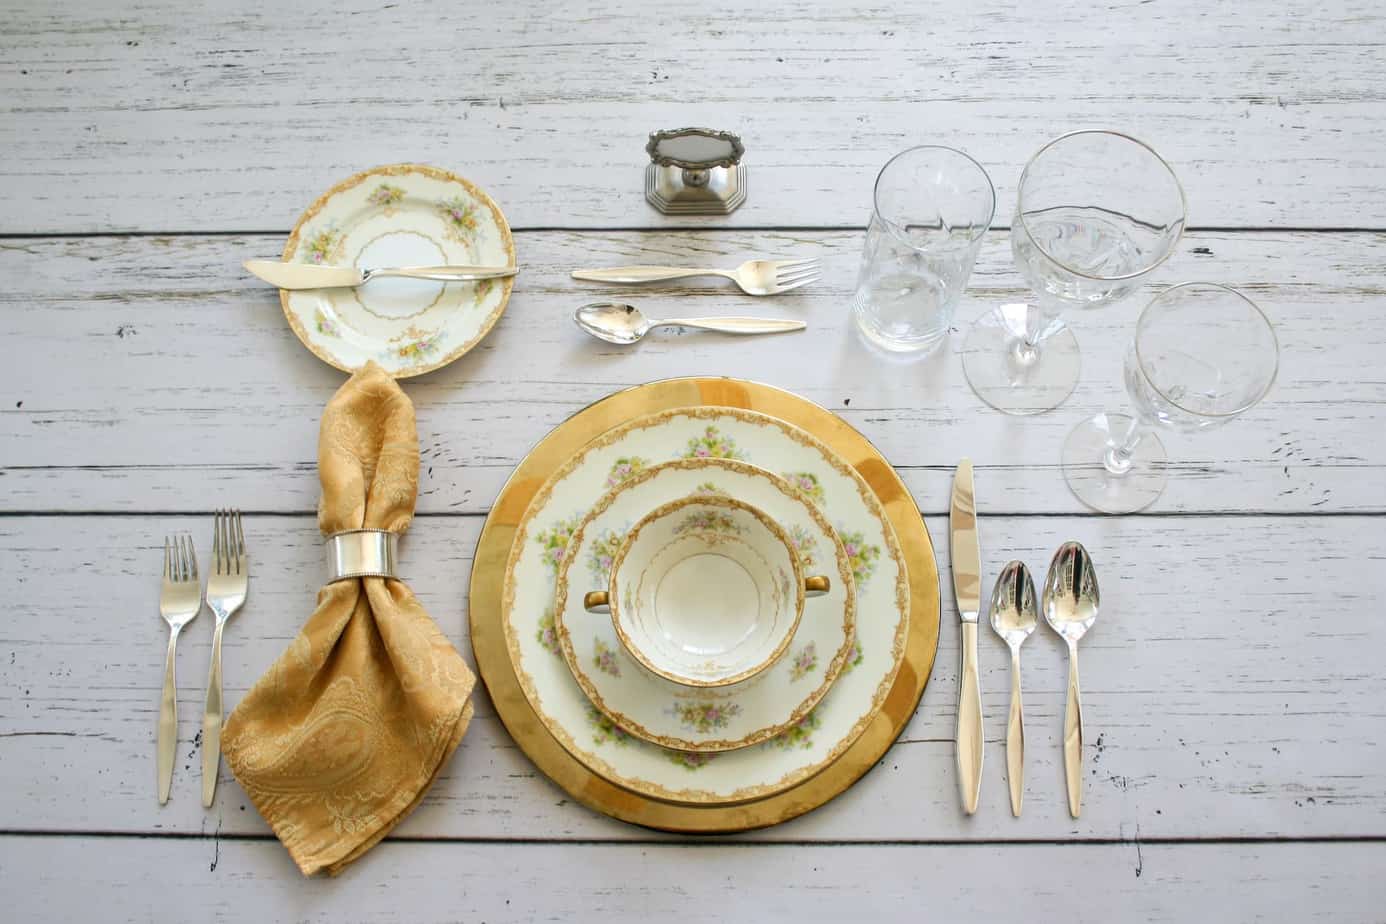 Table setting example for a formal meal